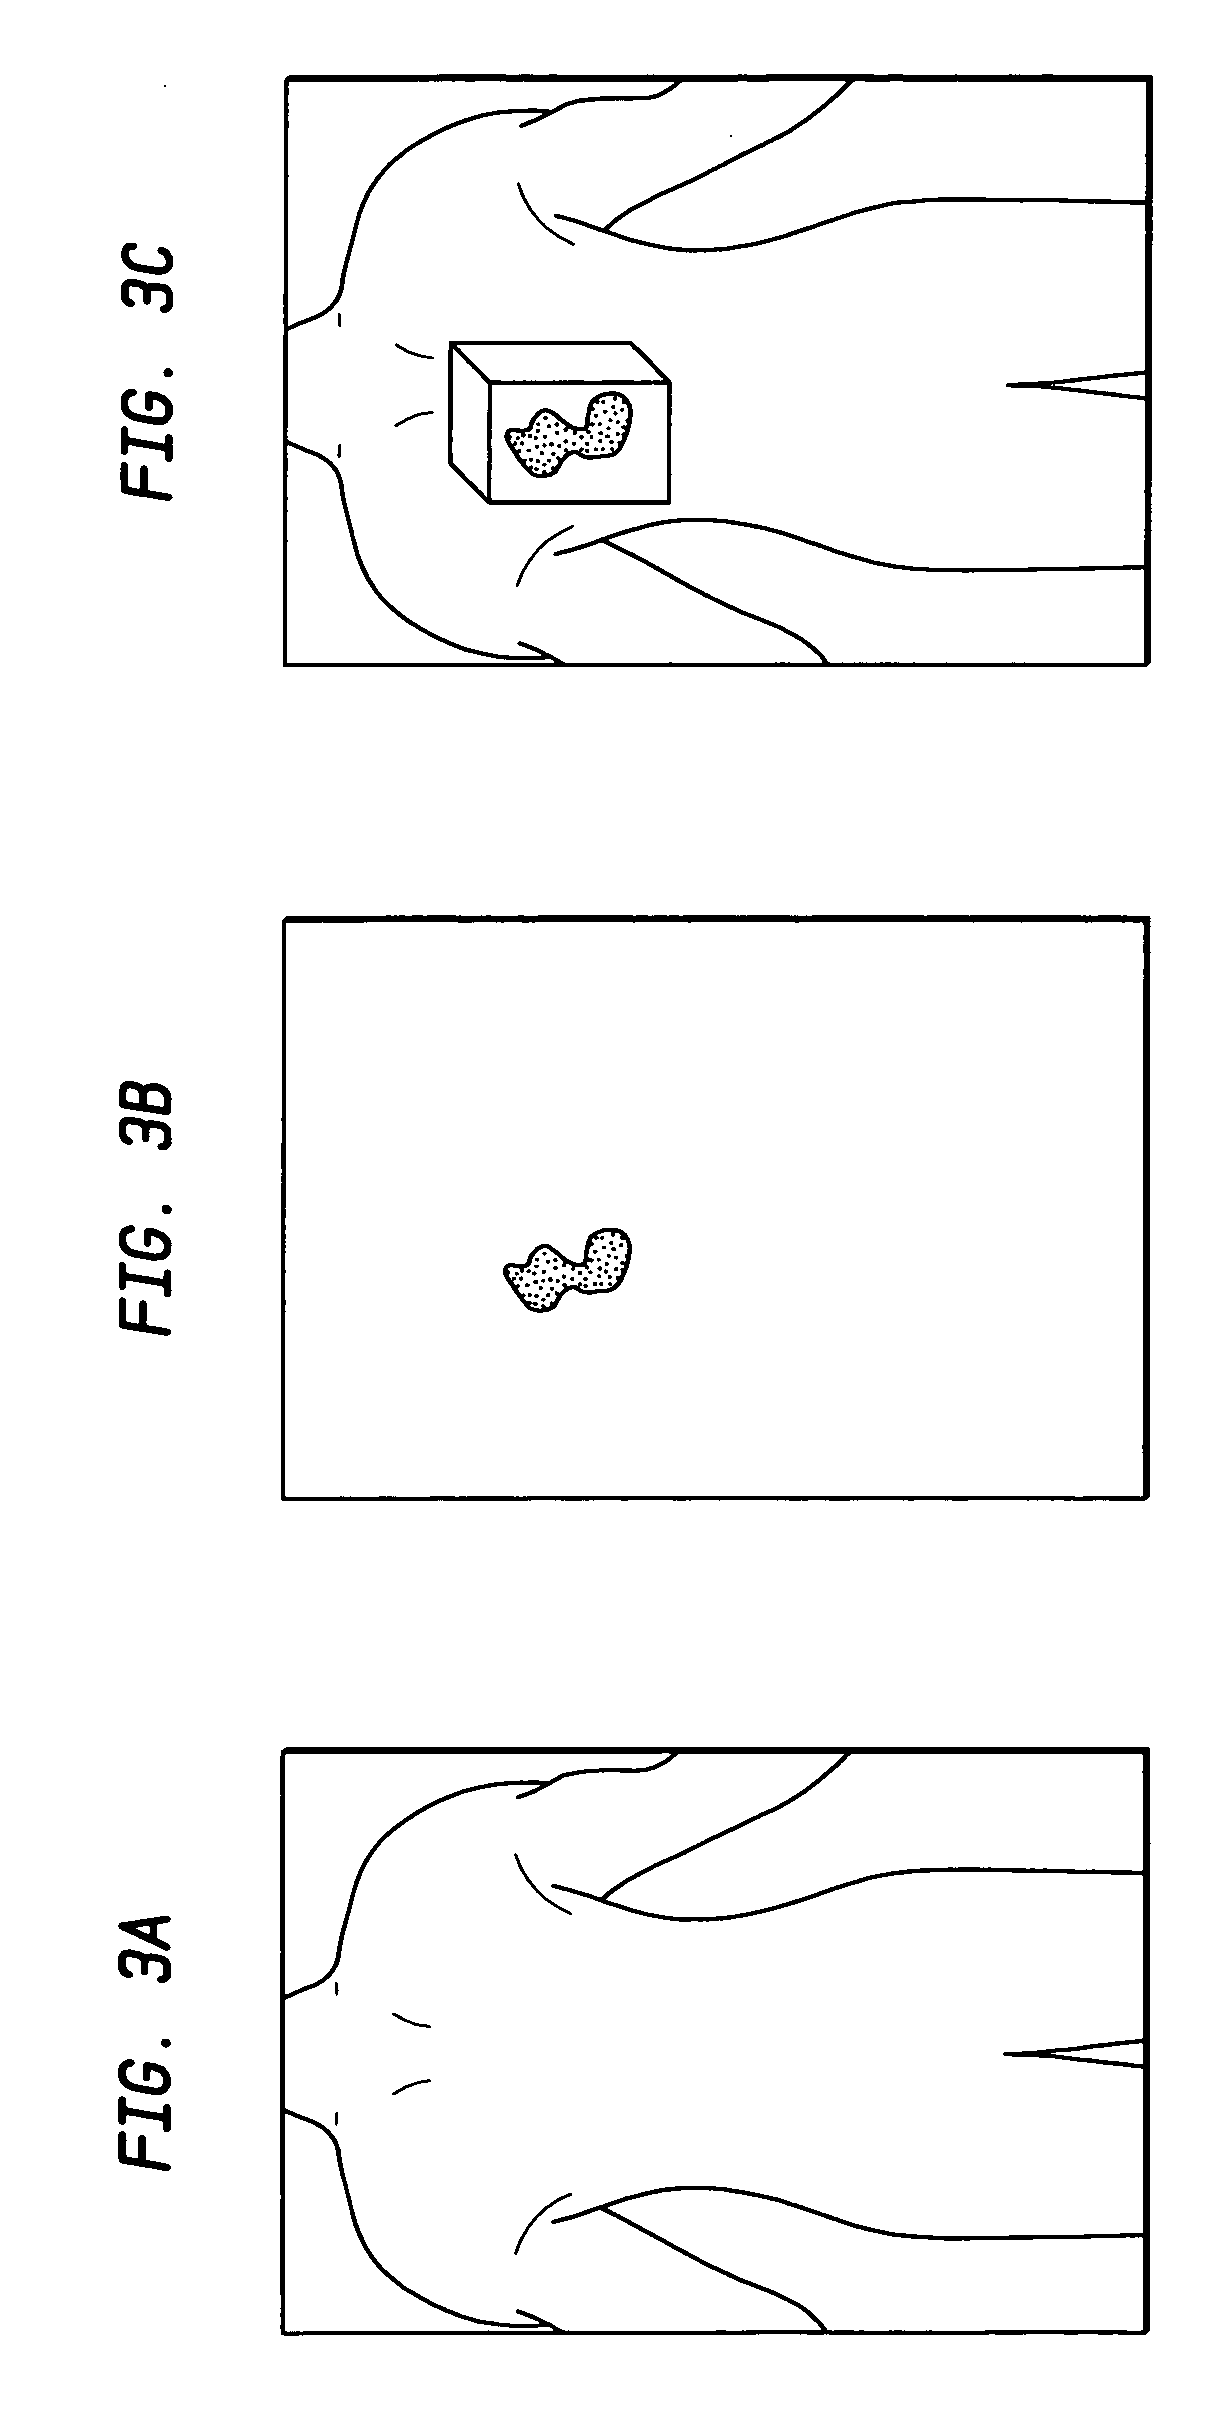 System and method of measuring disease severity of a patient before, during and after treatment